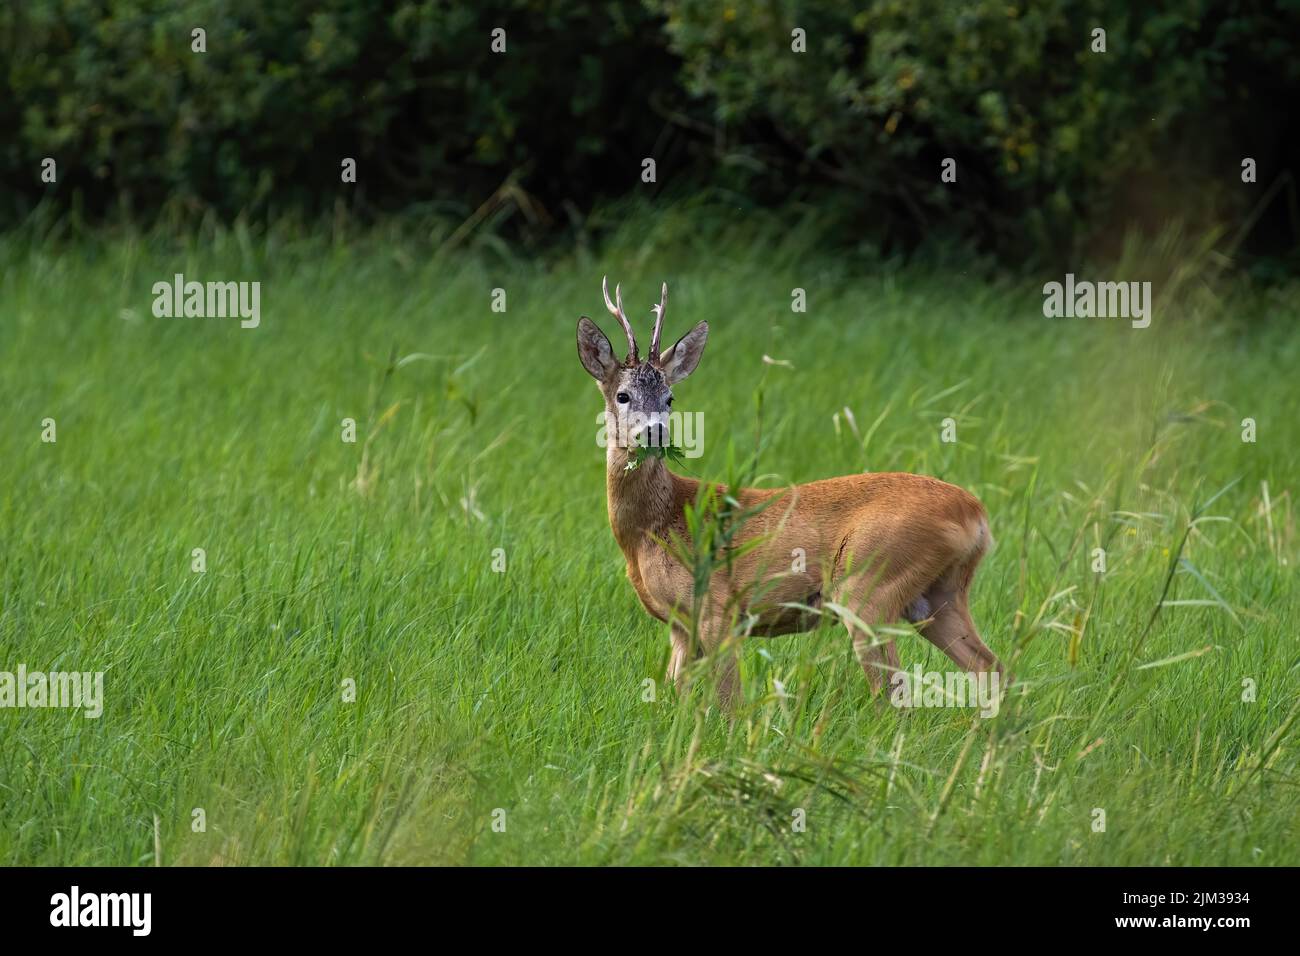 Roe deer grazing on green pasture in summertime nature Stock Photo